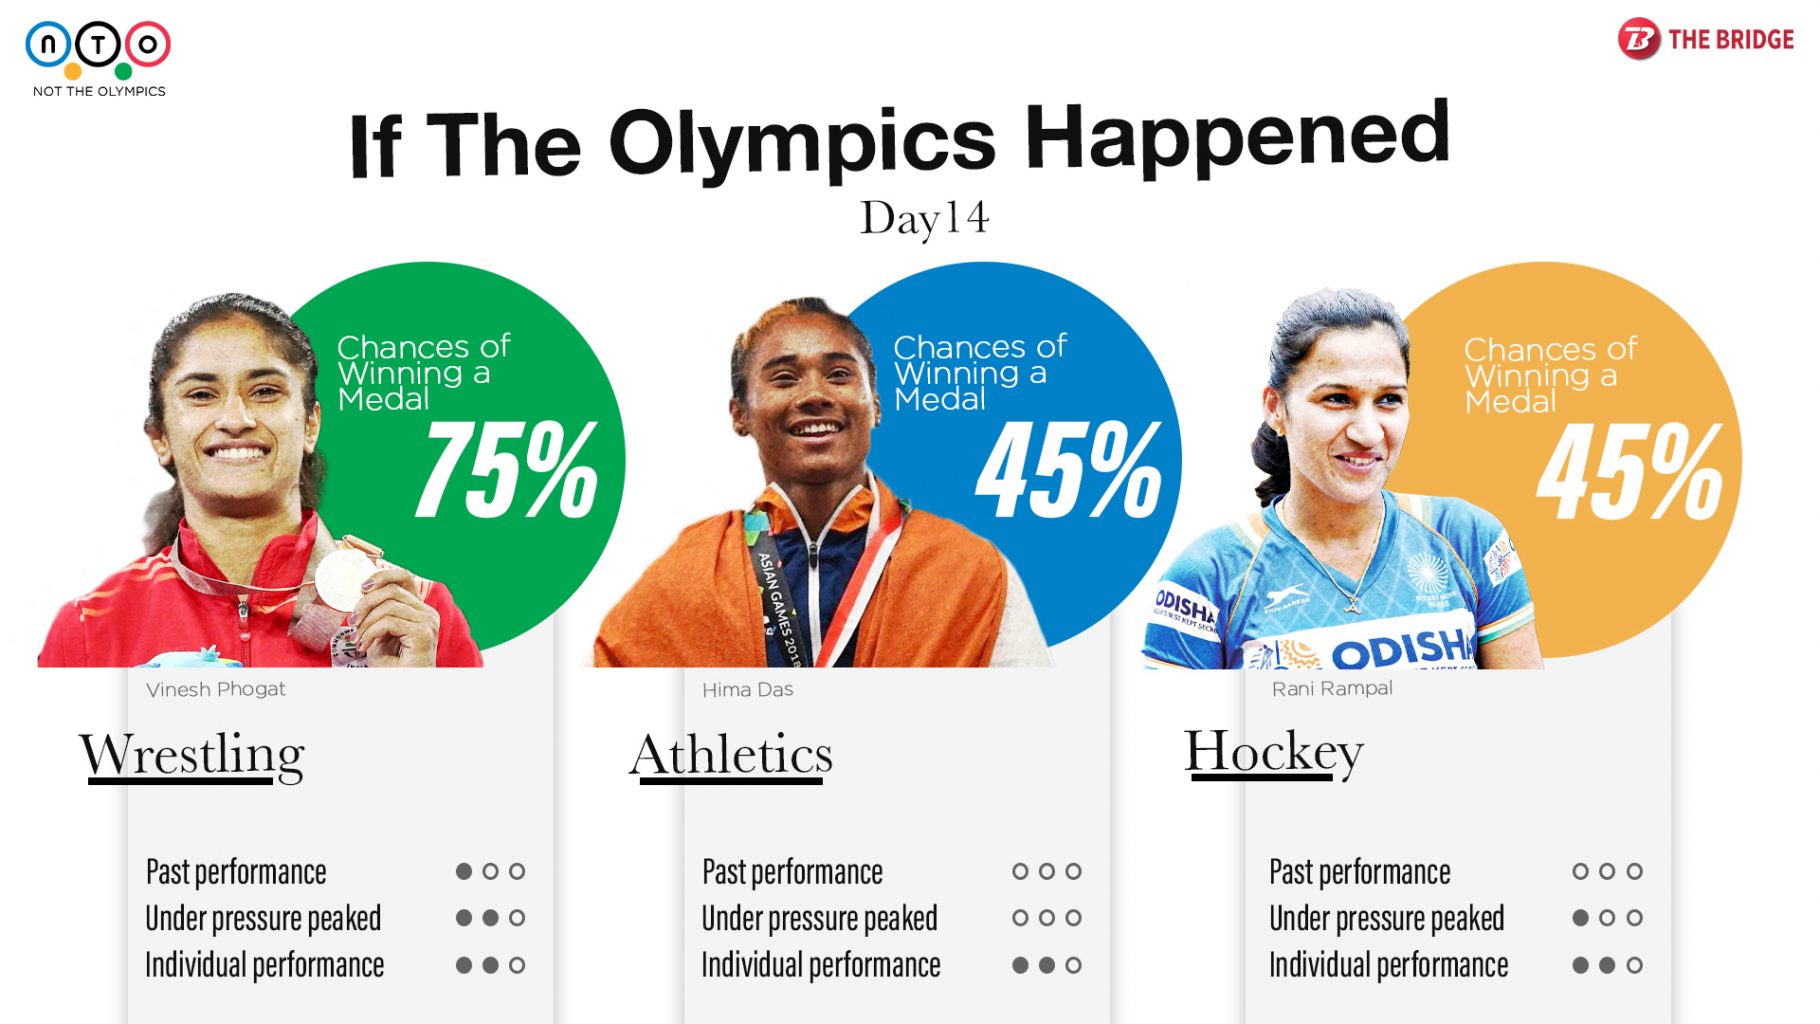 Today would have been the fourteenth day at the Olympics and India could have been a part of eight title matches.